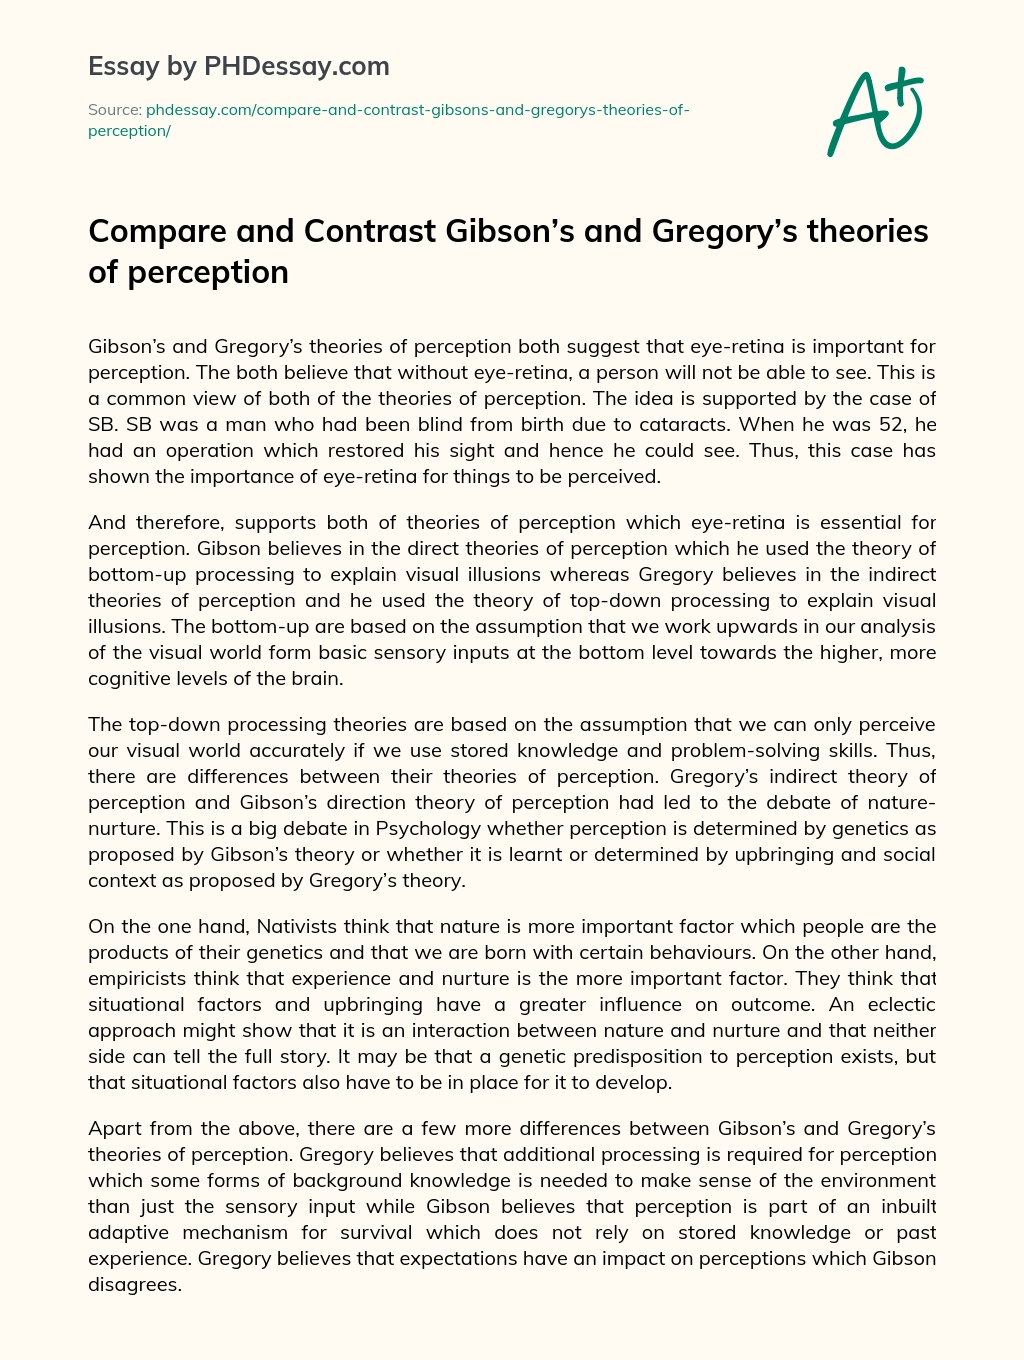 Compare and Contrast Gibson’s and Gregory’s theories of perception essay